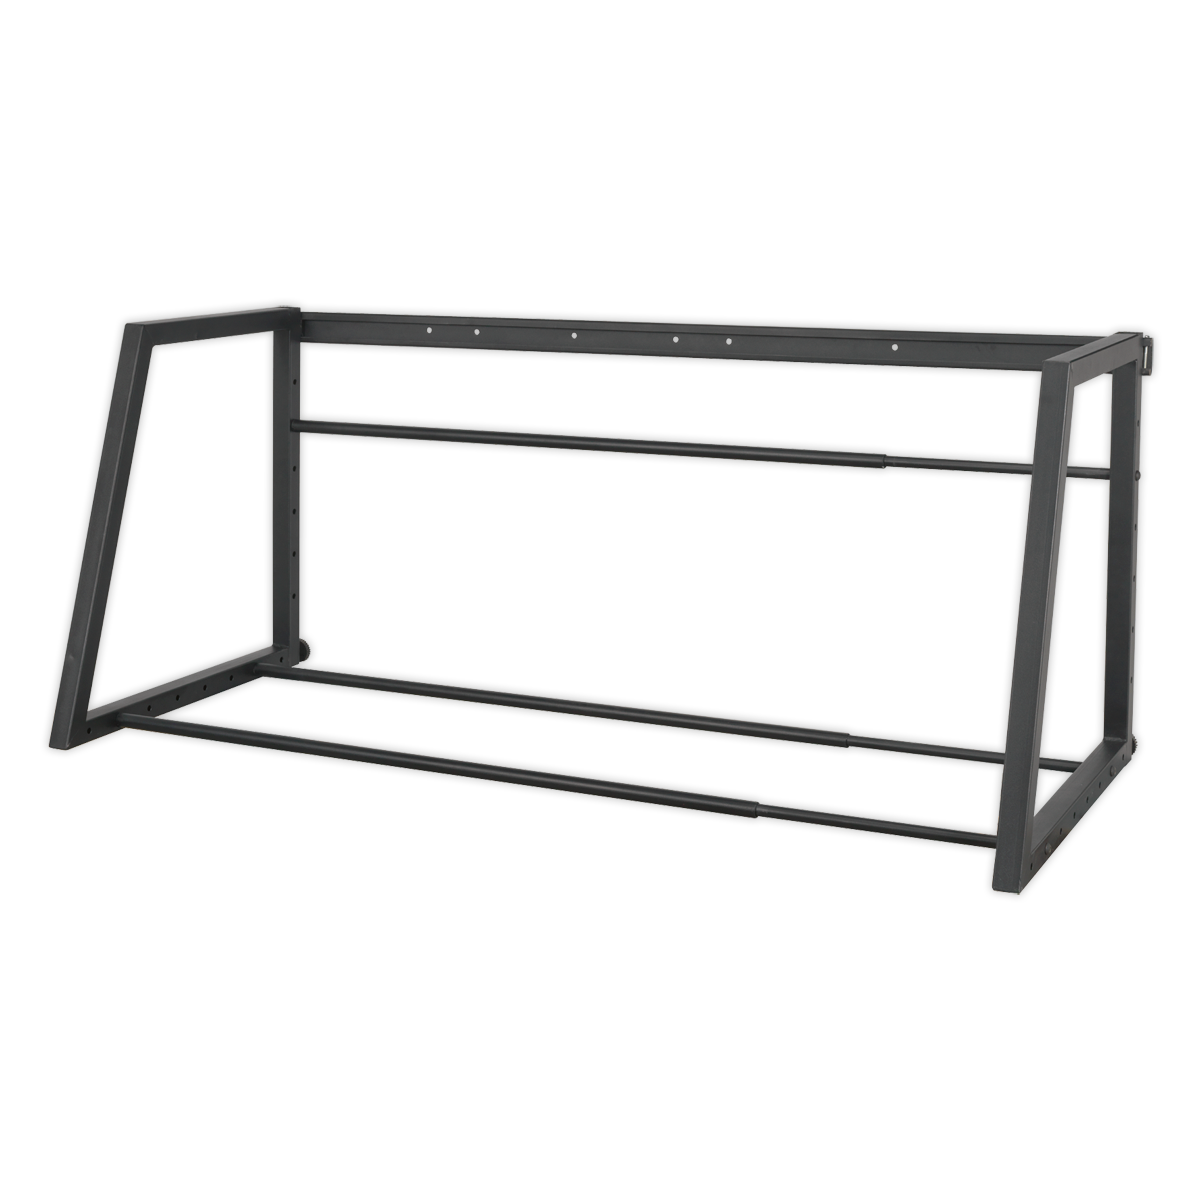 Extending Tyre Rack Wall or Floor Mounting - STR001 - Farming Parts